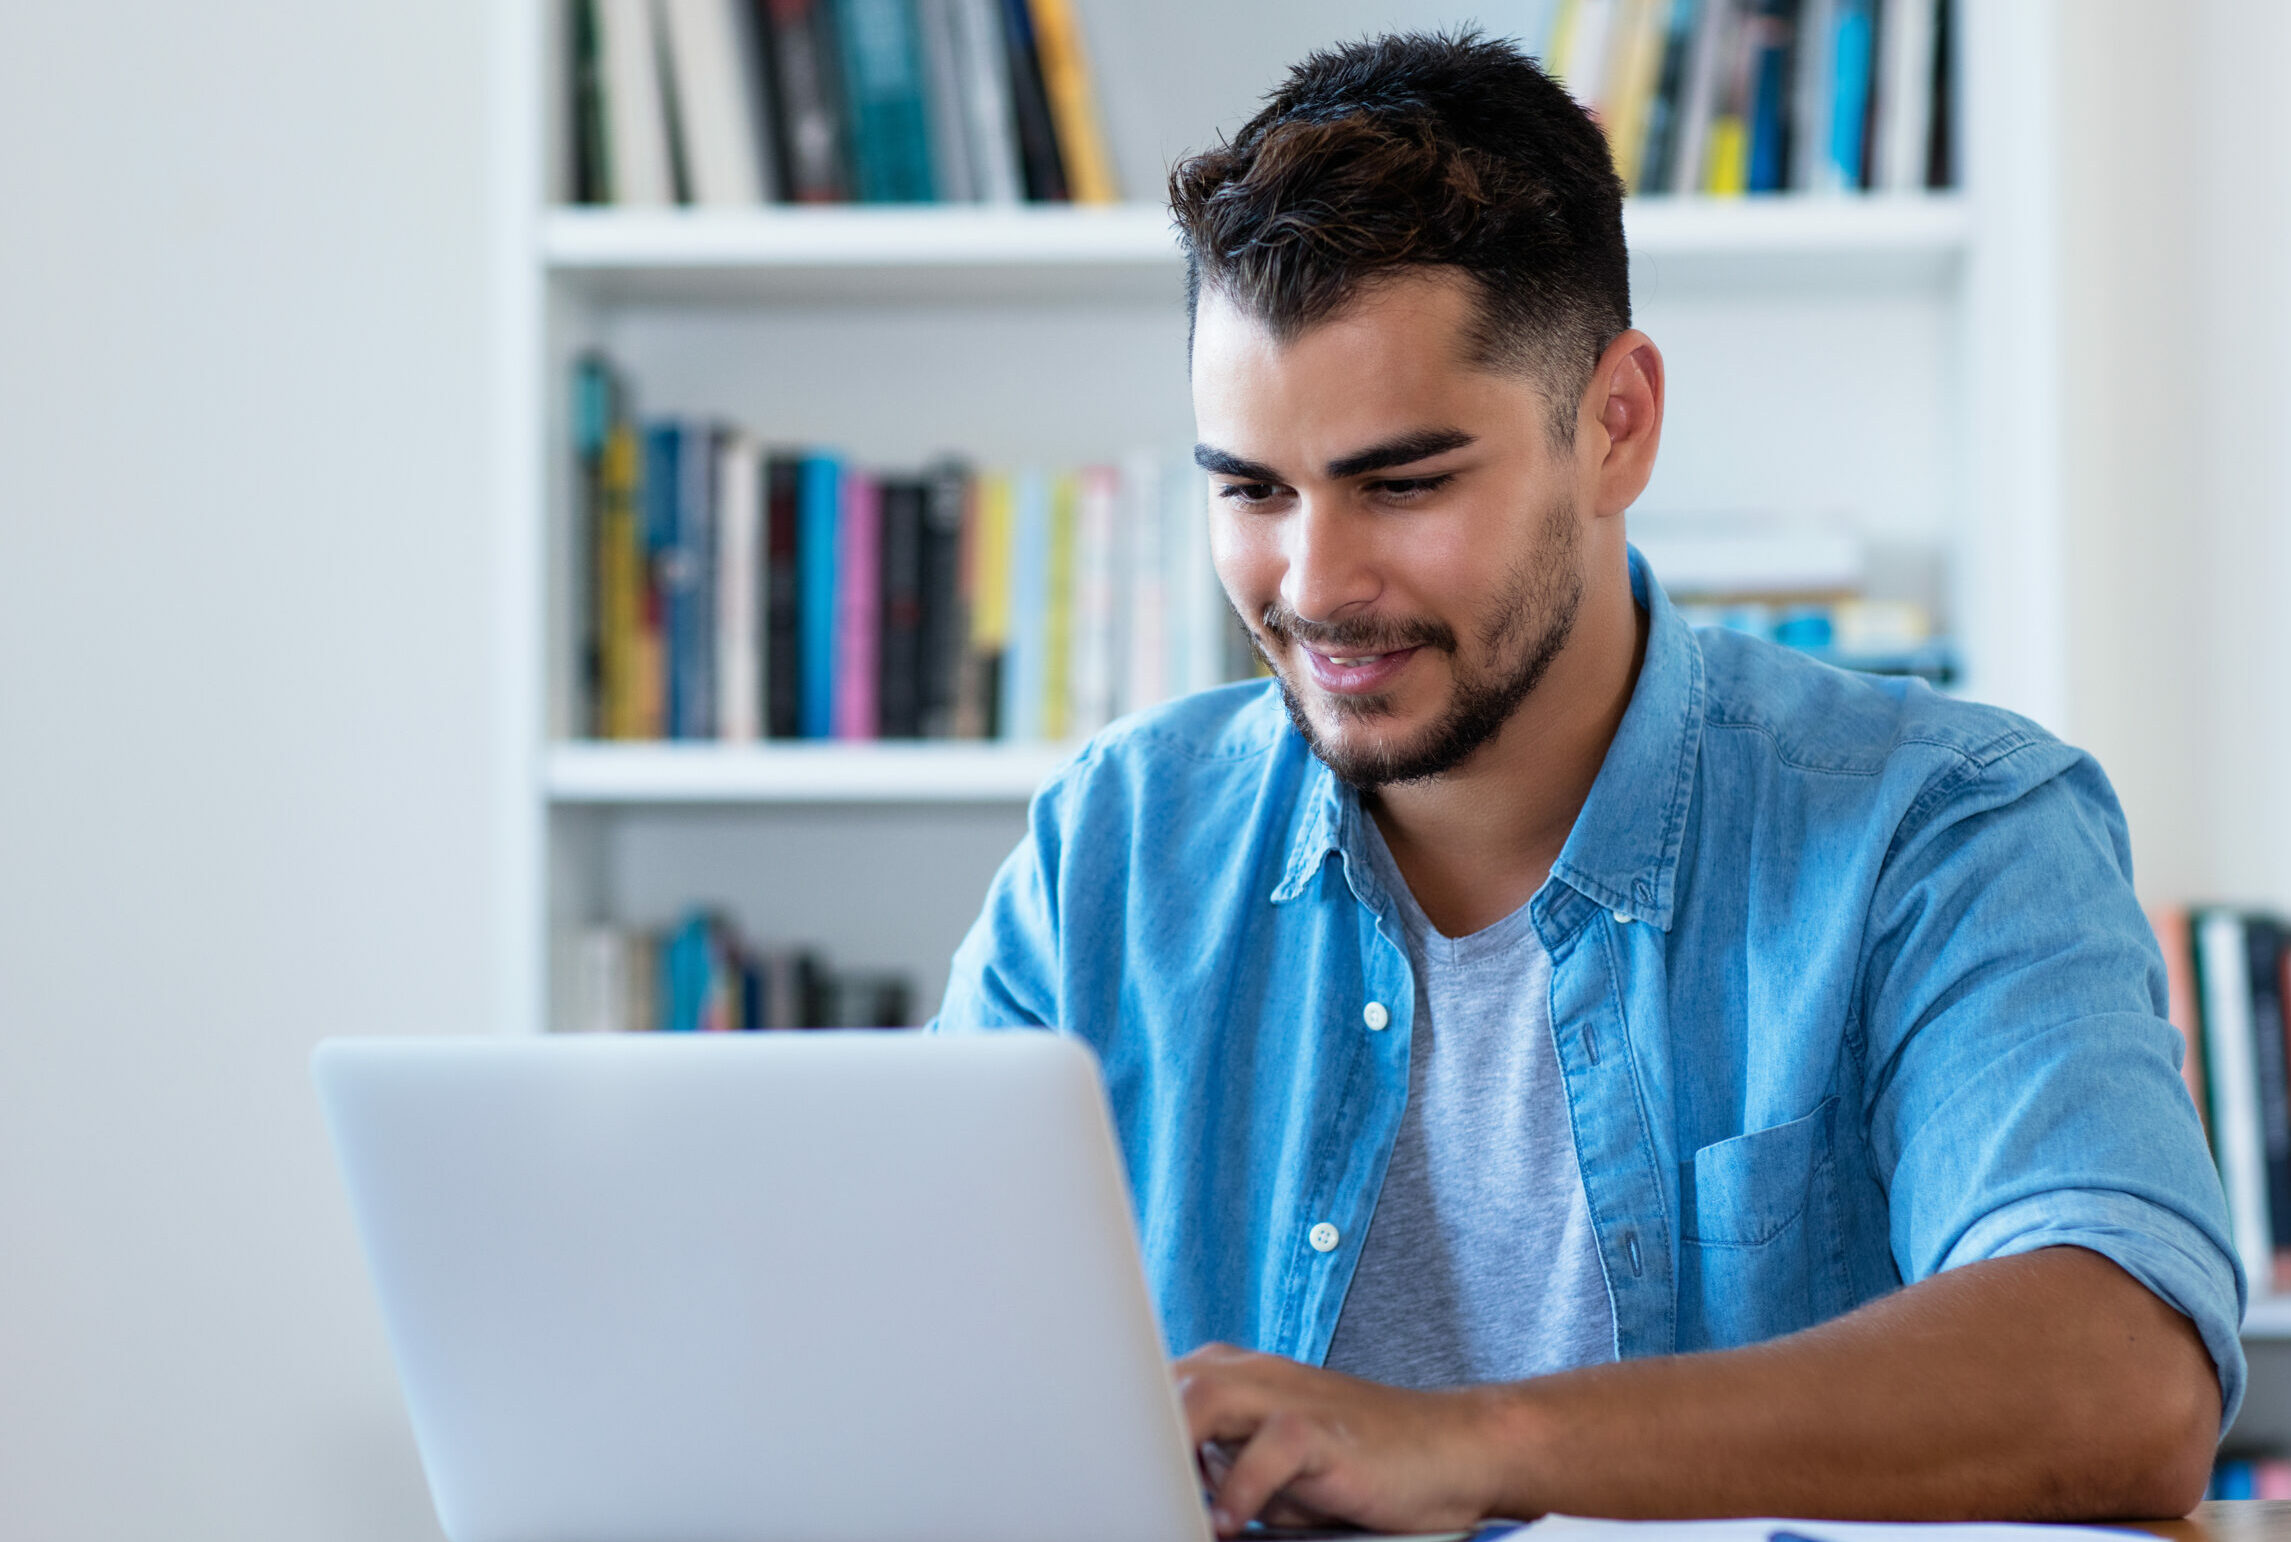 man sending email with laptop, earning an online bachelor’s degrees